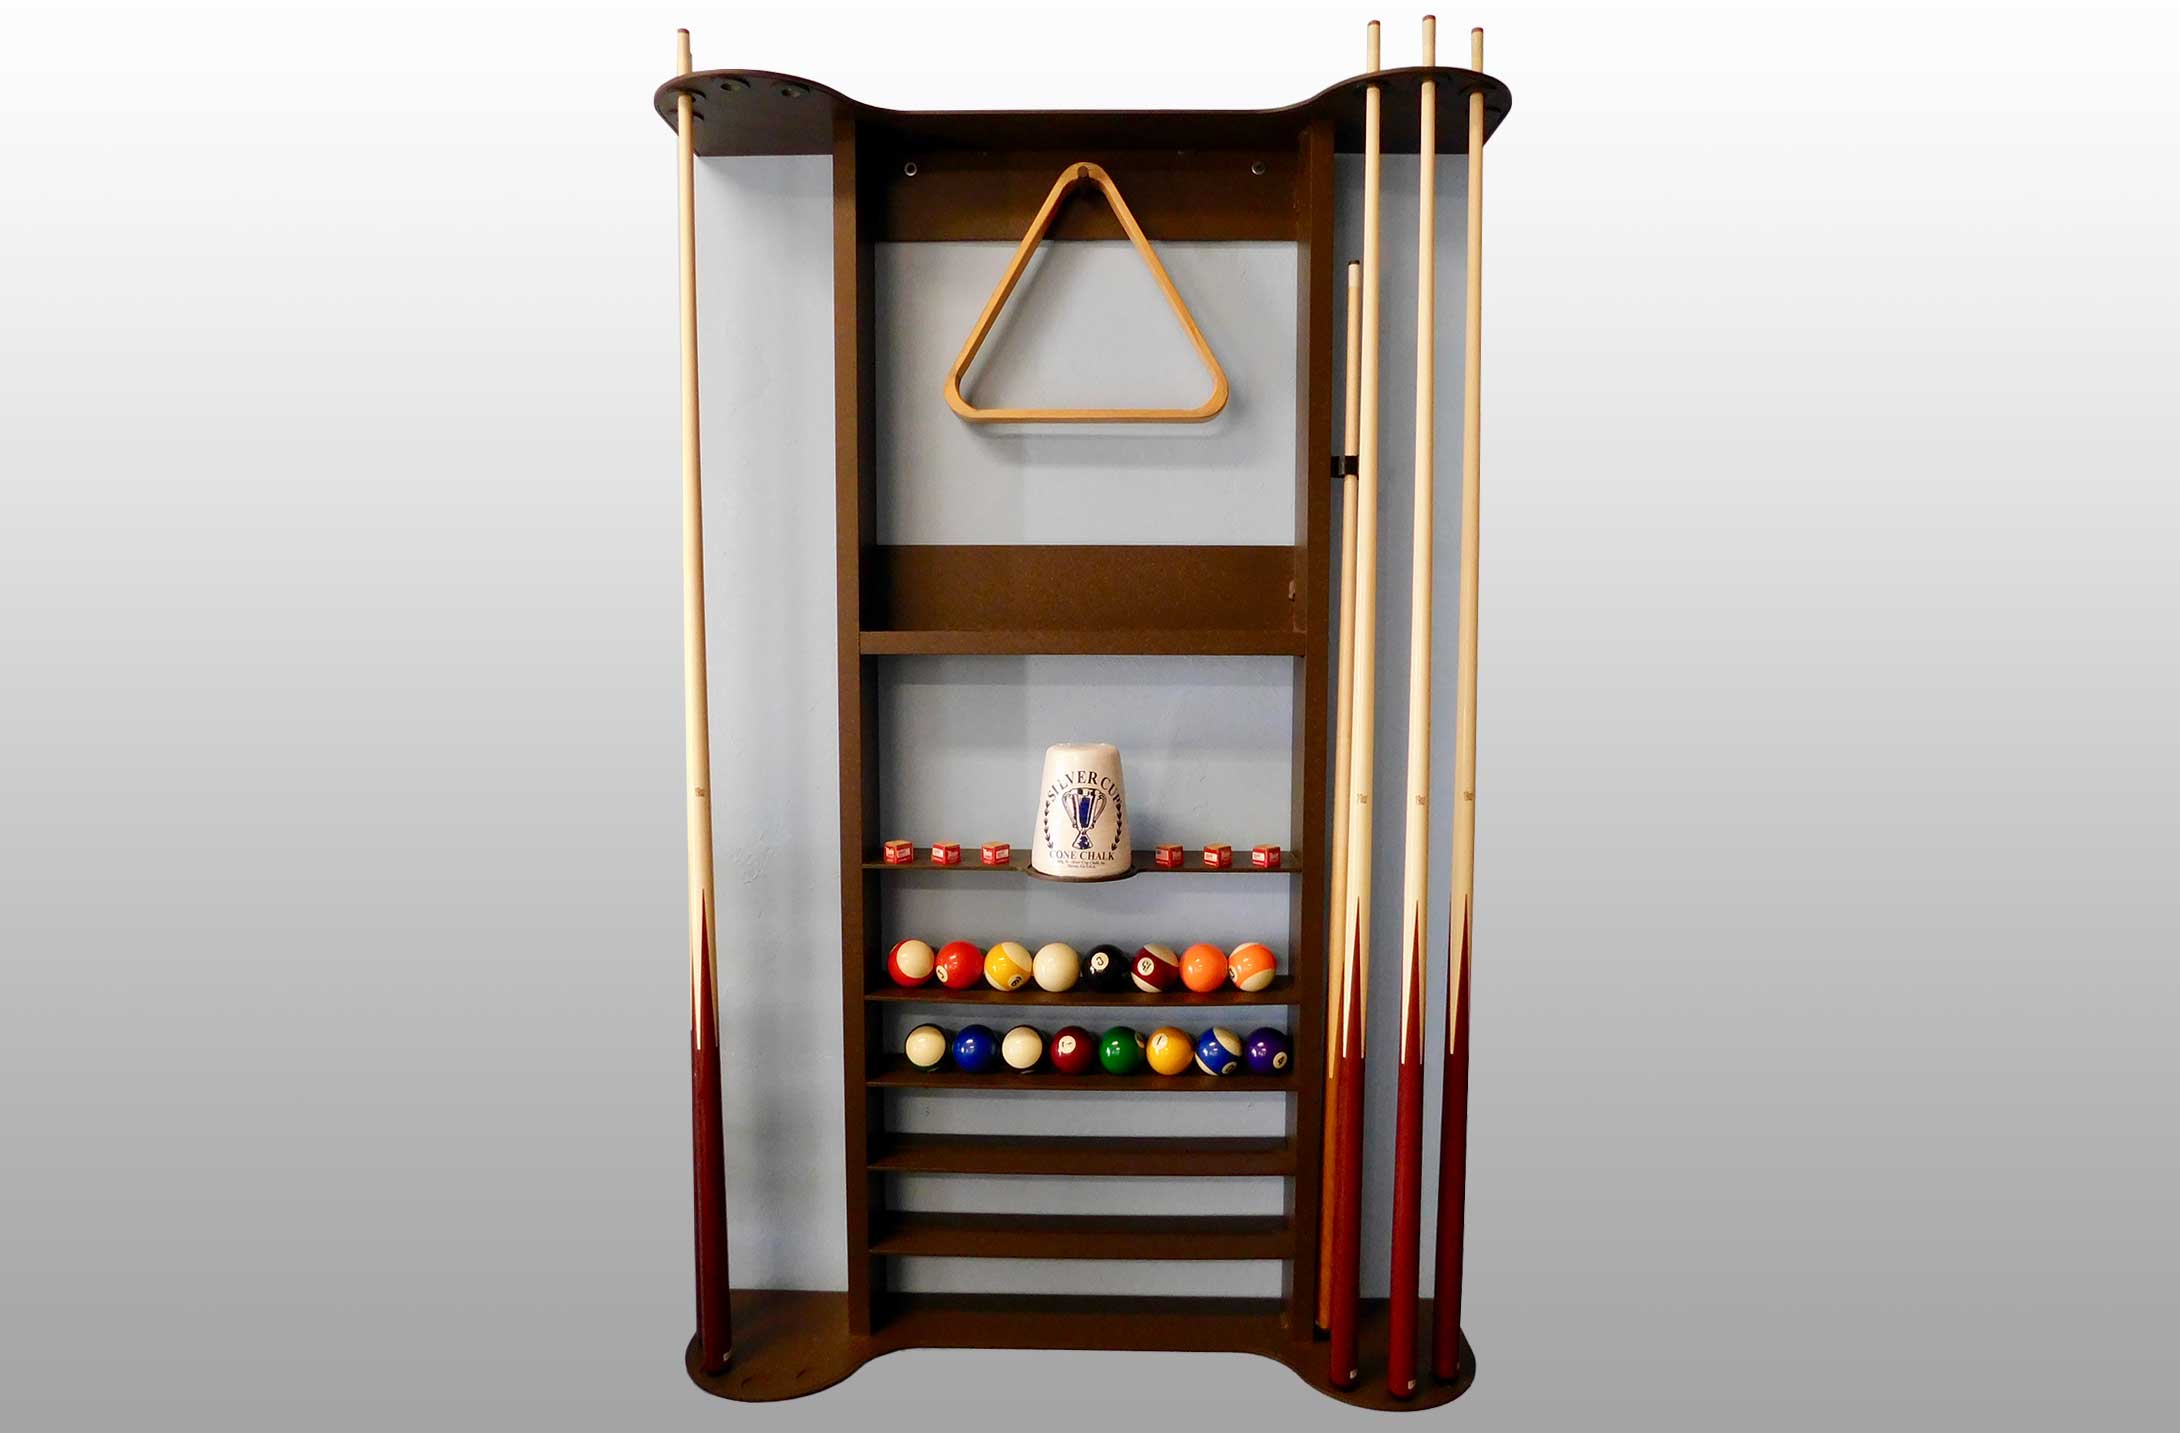 Details about   Wood Pool Cue Rack Stick Holder Wall Mount Holder Billiard Table Accessories US 